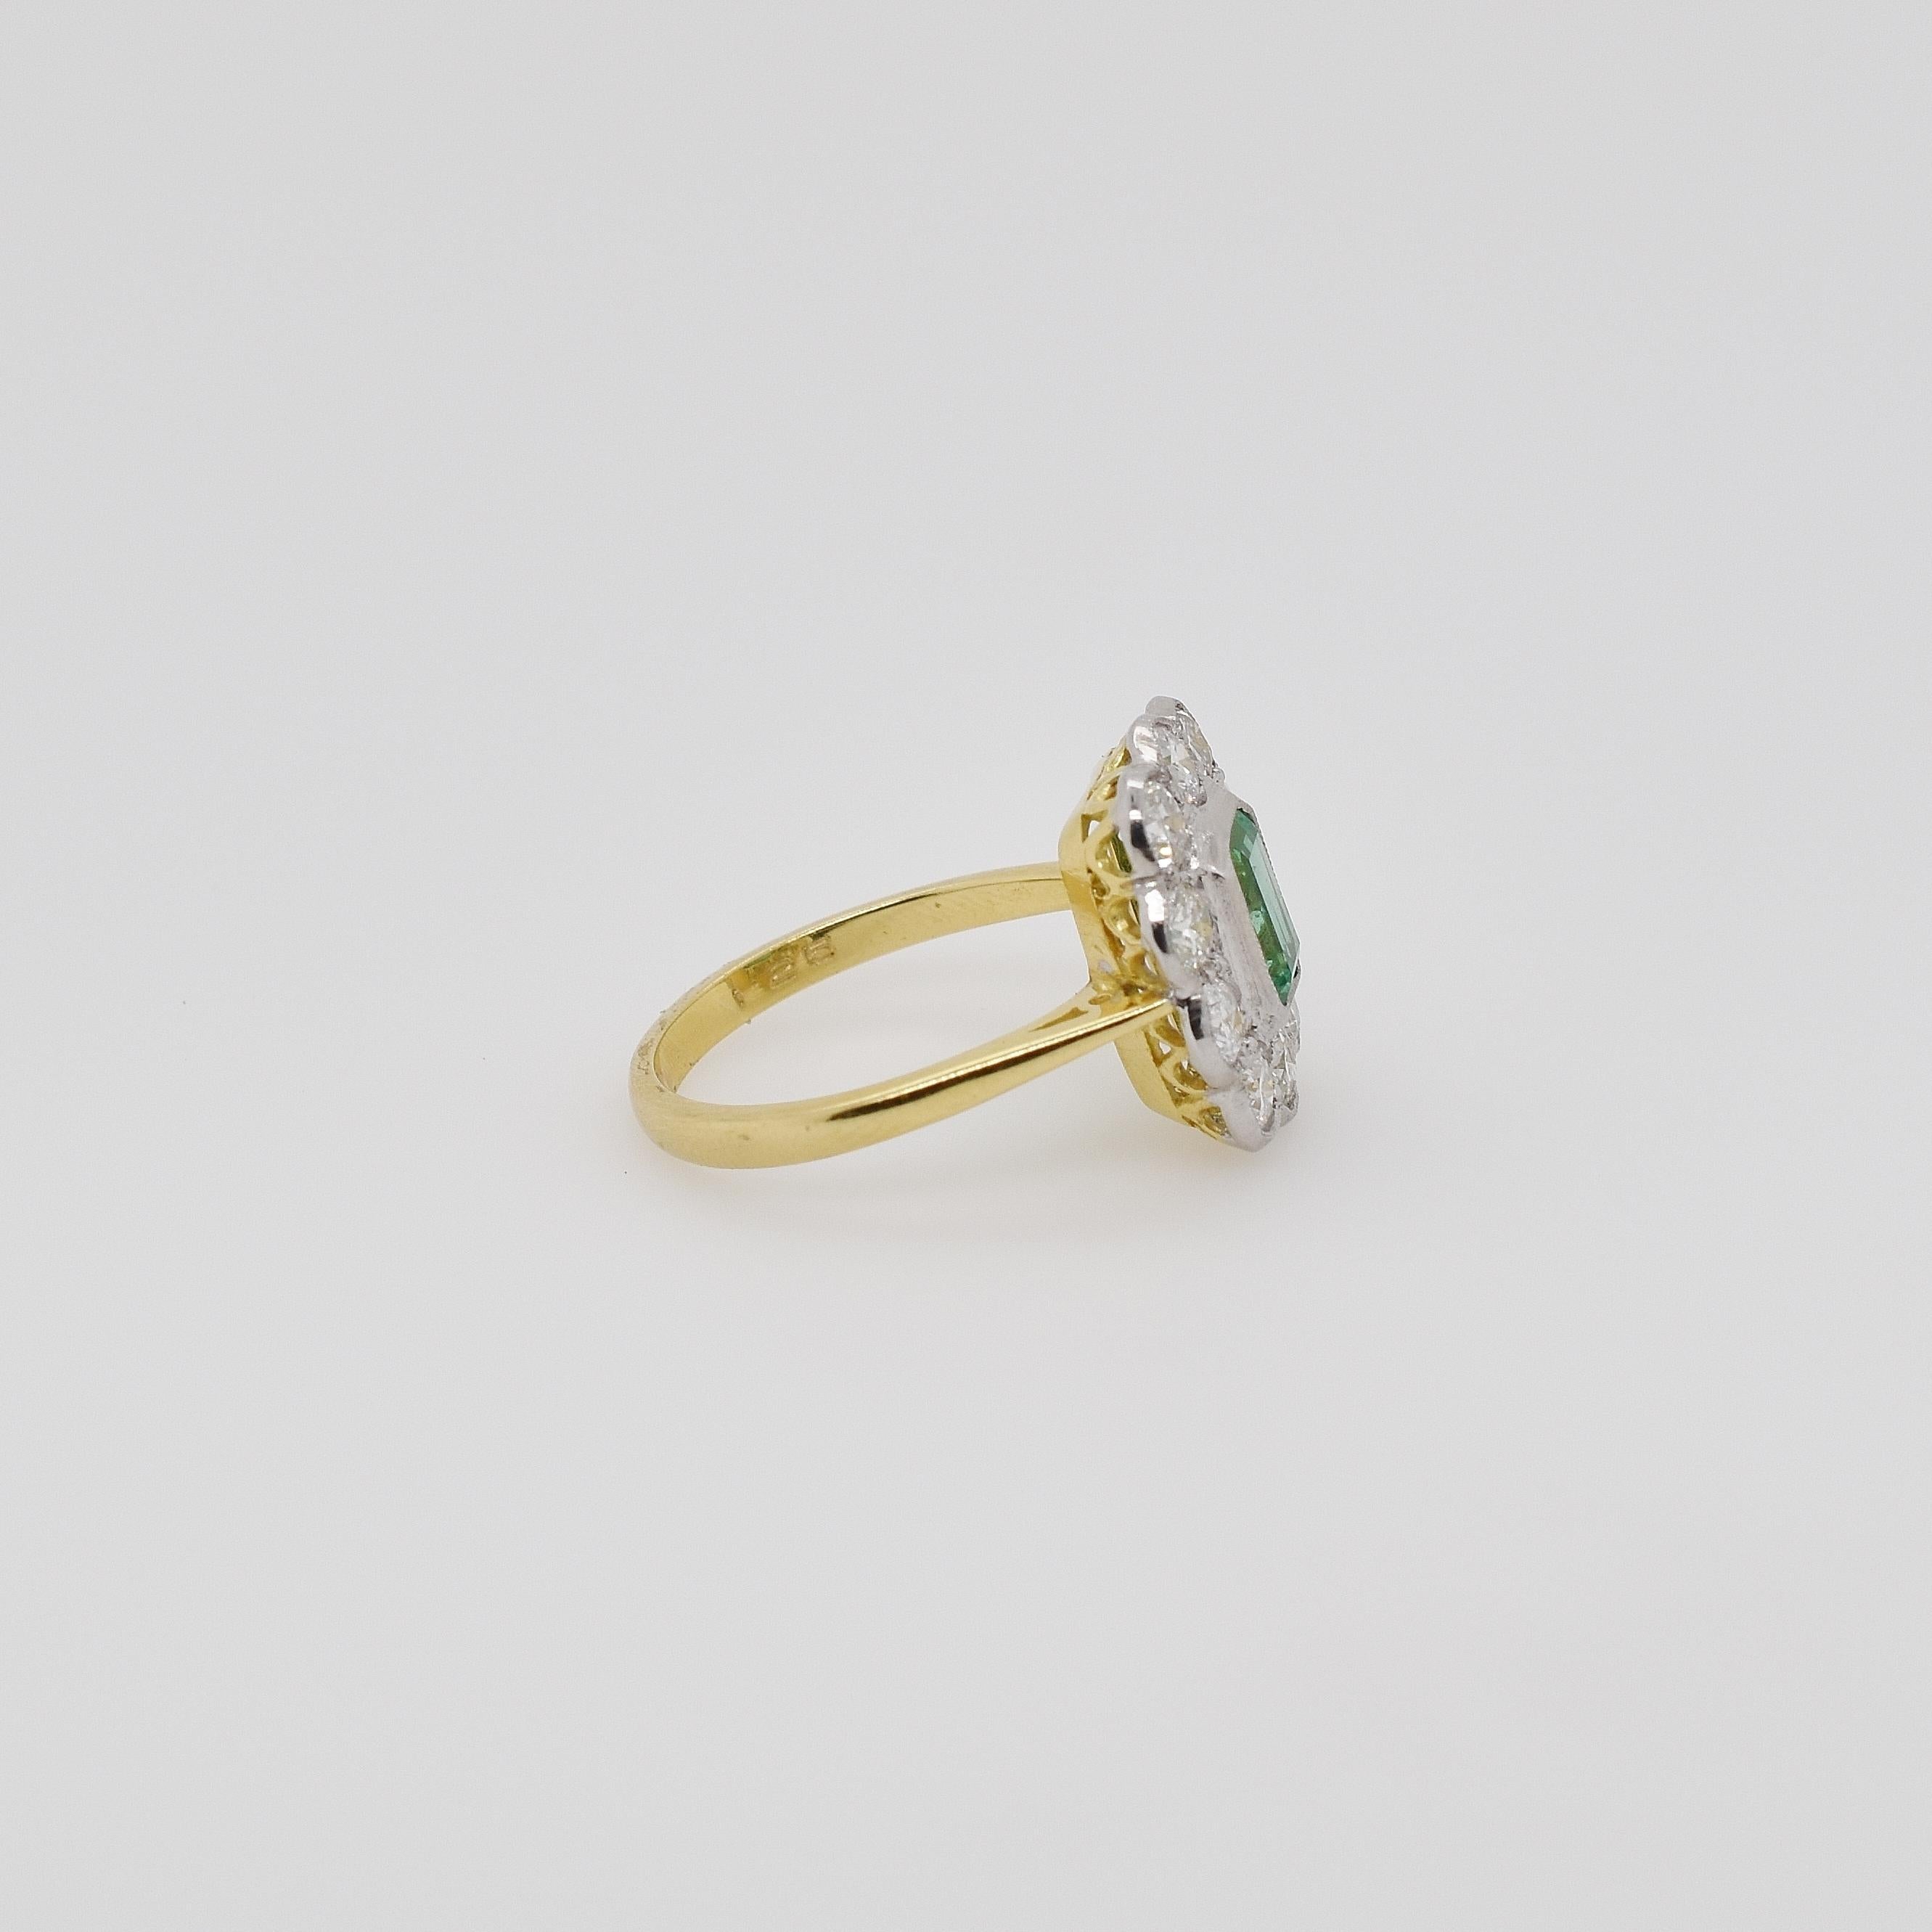 18ct yellow gold and platinum vintage emerald and old cut diamond cluster ring. The center emerald cut emerald is 0.85ct, surrounded by 10 old cut diamonds totalling 1.00ct. 
Size 7 US - can be resized